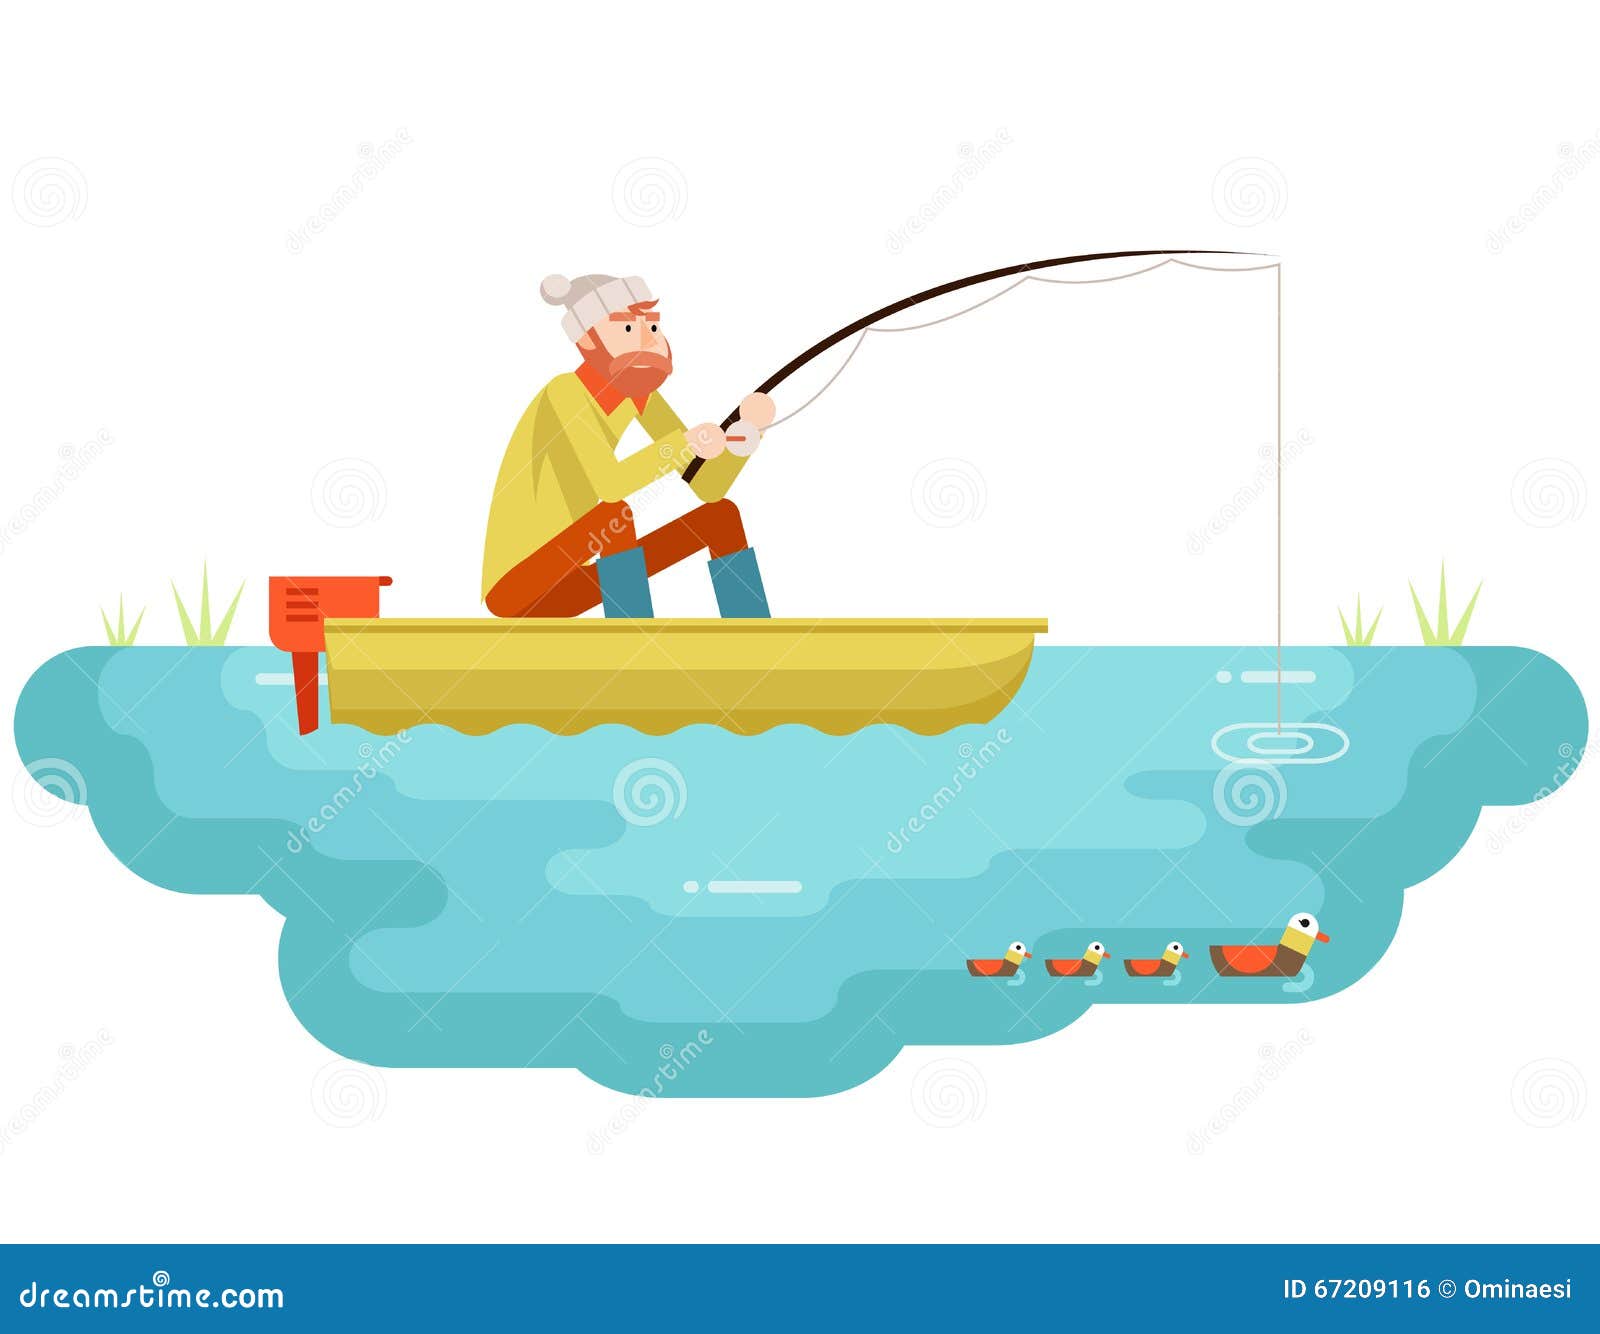 Lake Fishing Adult Fisherman with Fishing Rod Boat Birds Concept Character  Icon Flat Design Template Vector Stock Vector - Illustration of birds,  activity: 67209116